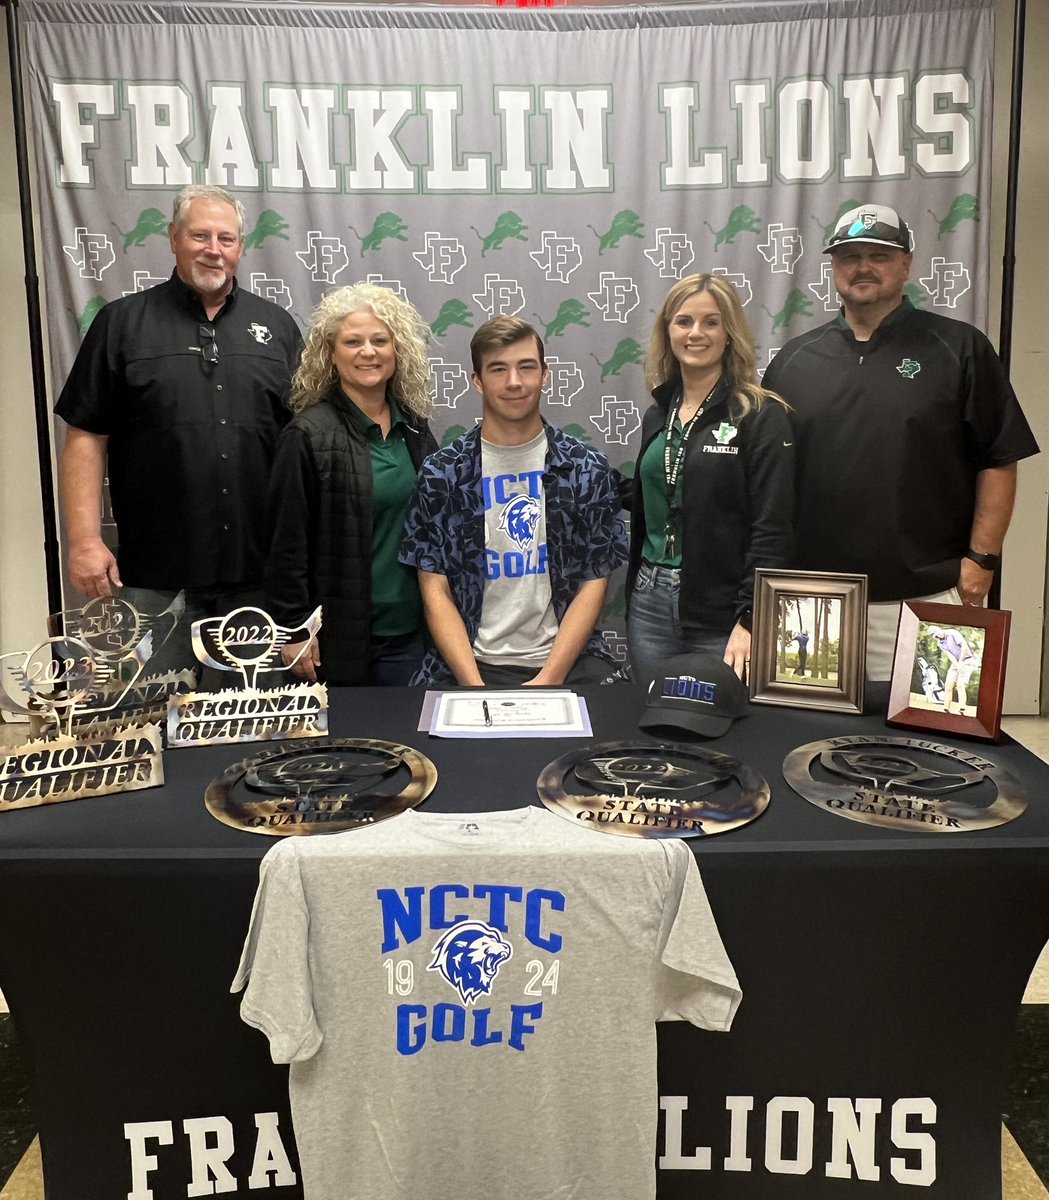 Congratulations to Ryan Tucker! Ryan has signed a commitment letter to play golf at North Central Texas College! ⛳️